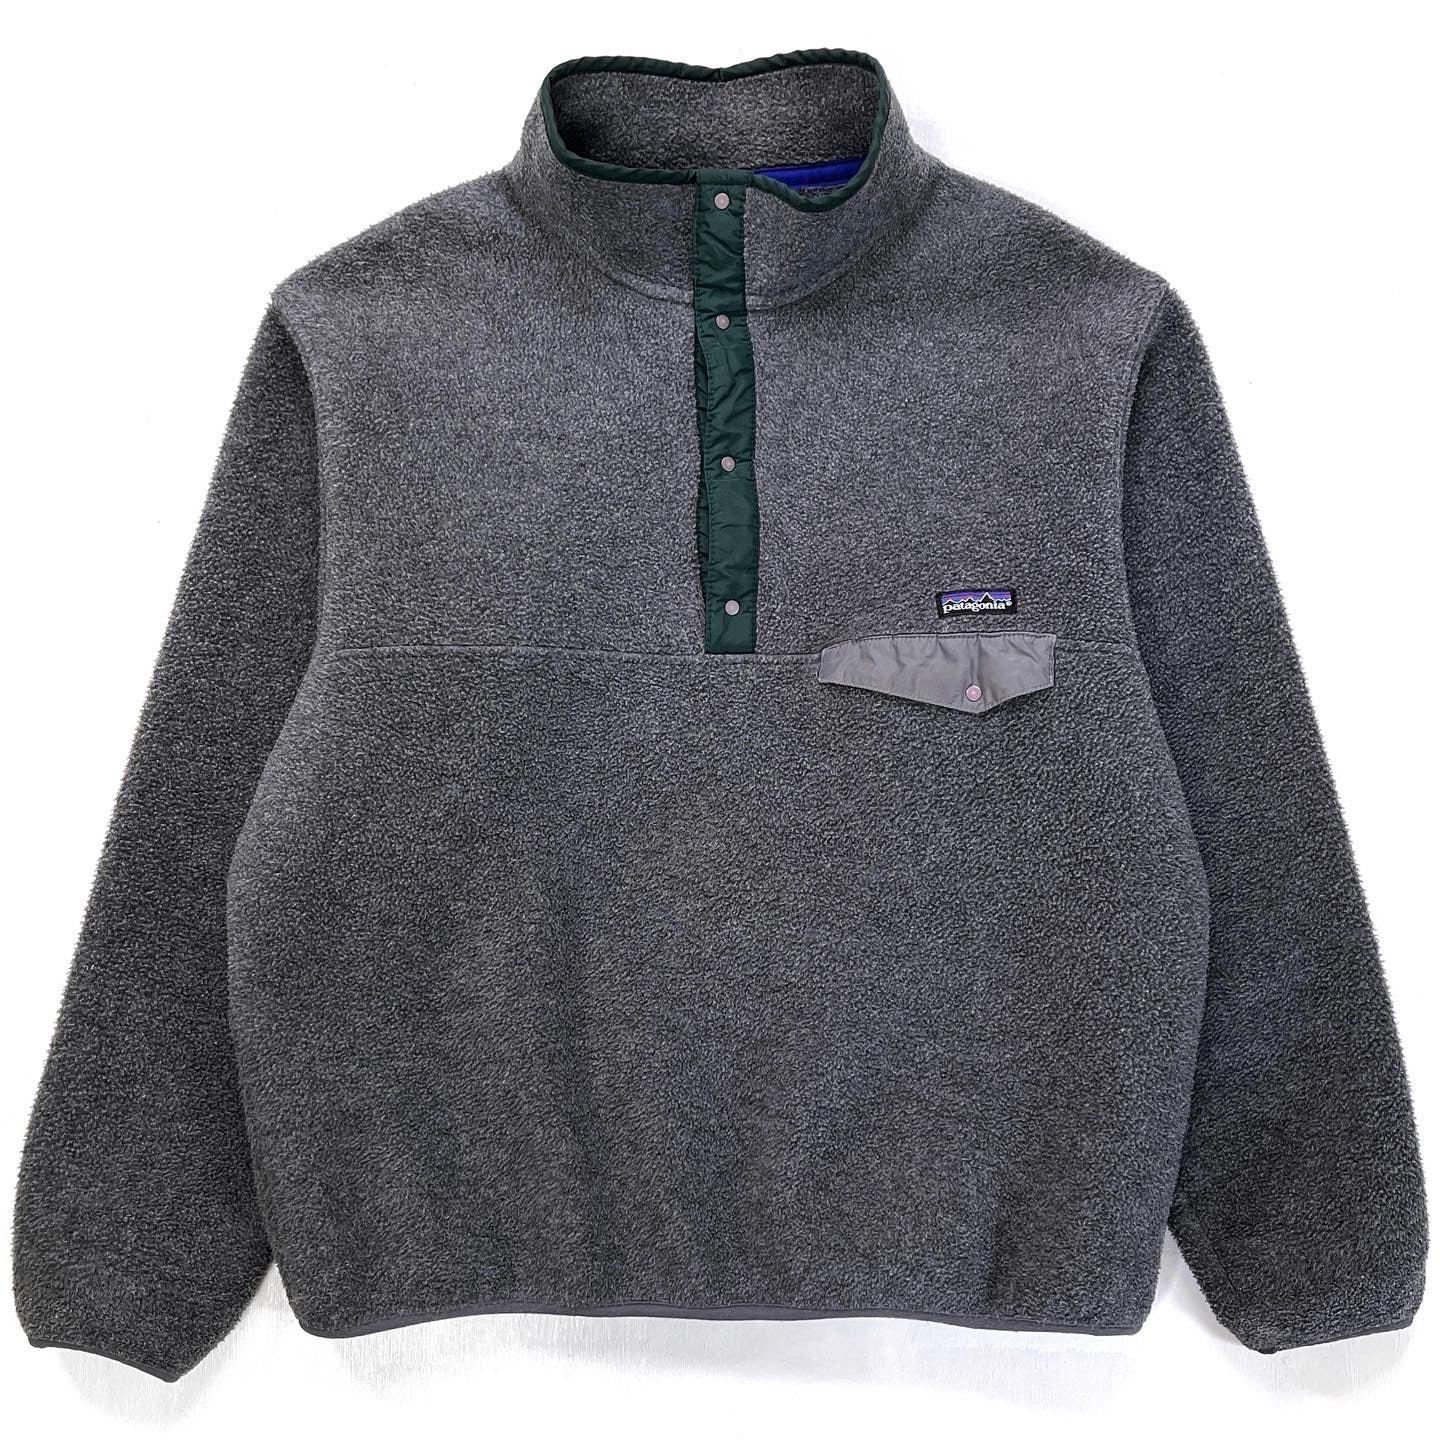 1992 Patagonia Synchilla Snap-T Pullover, Charcoal & Hunter (XL)